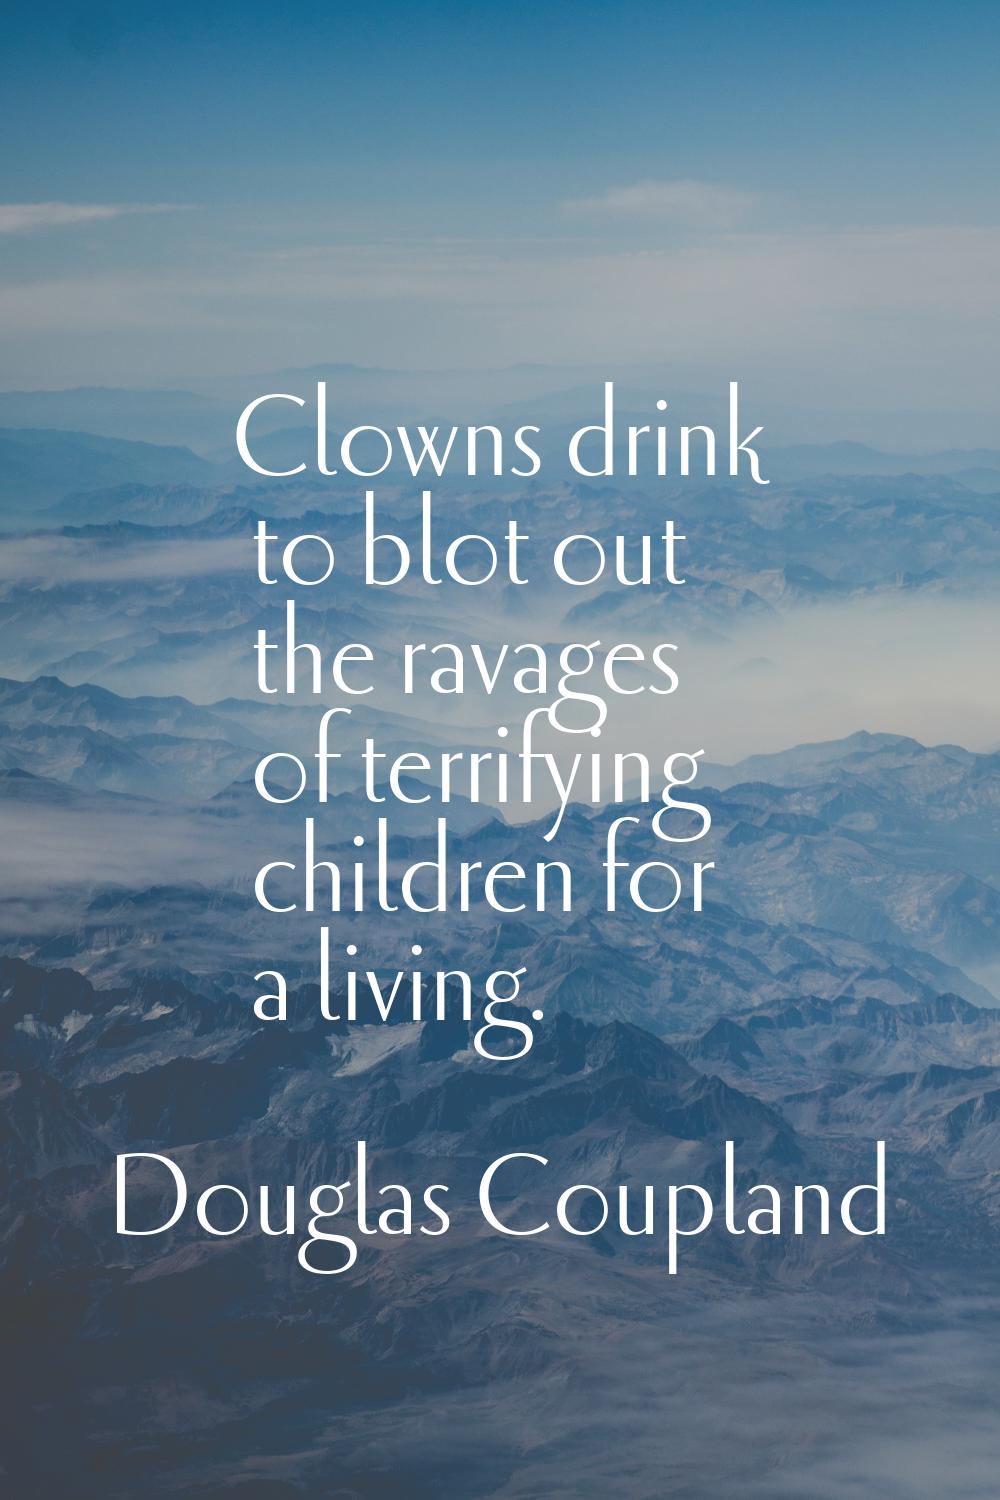 Clowns drink to blot out the ravages of terrifying children for a living.